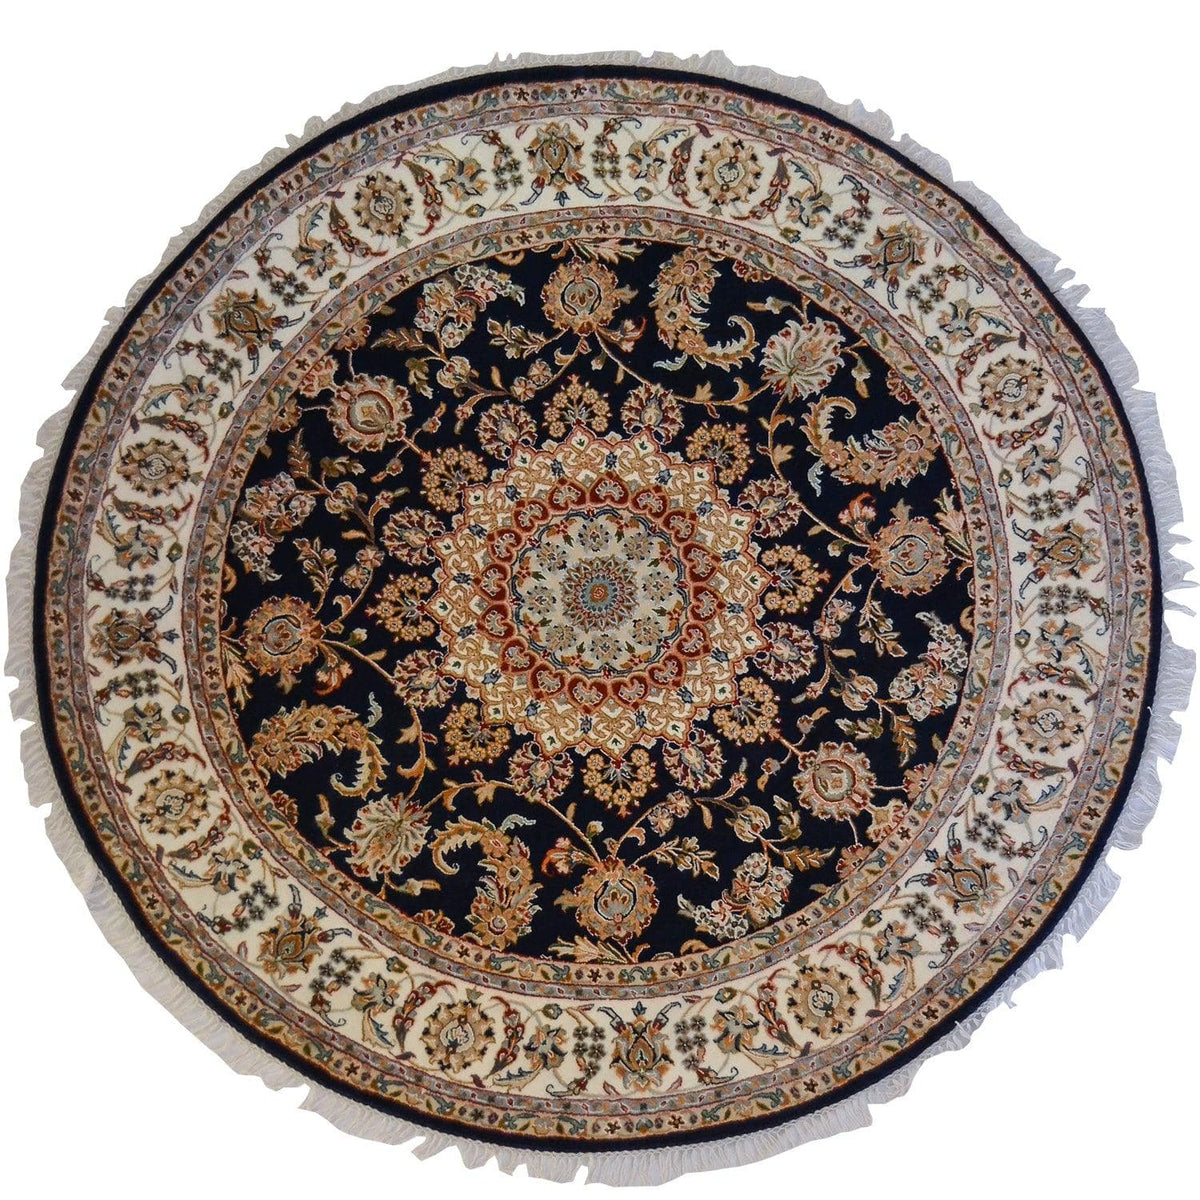 Find Hand-knotted Wool &amp; Silk Nain Round Rug 197cm x 198cm